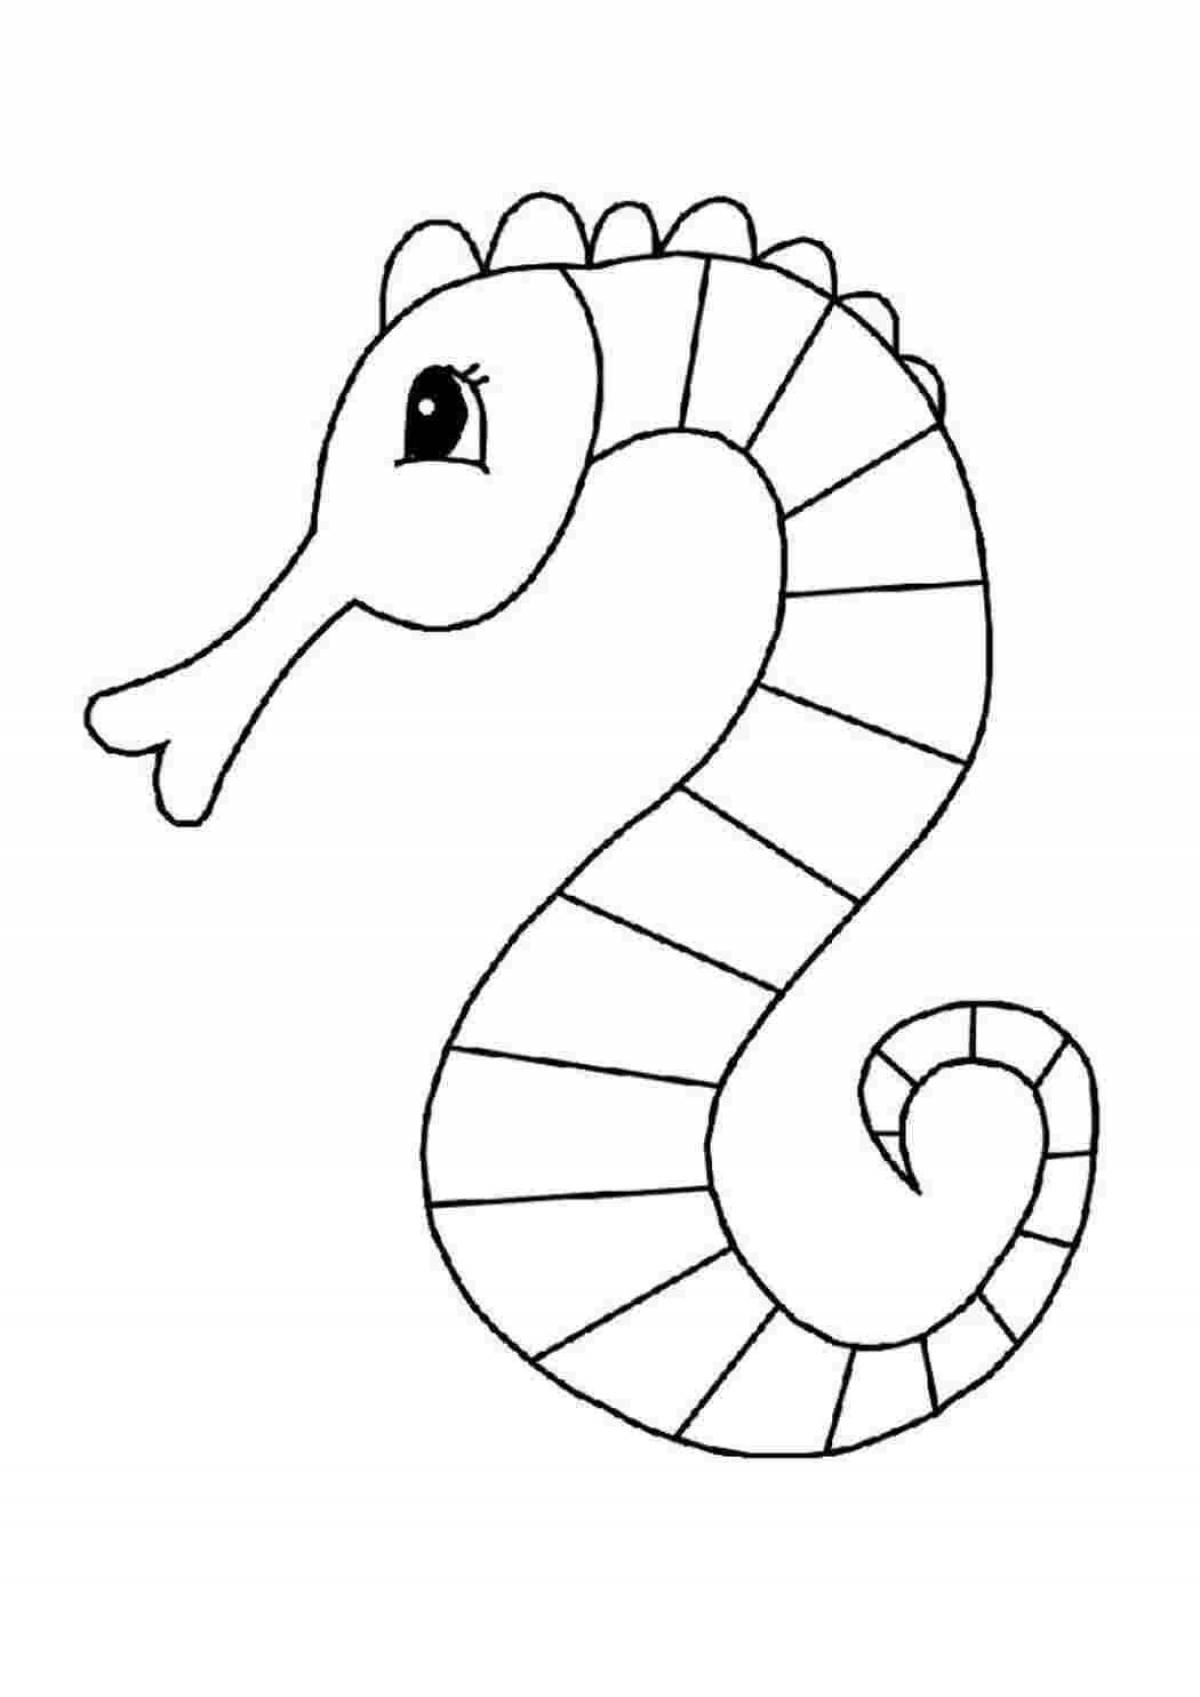 Crazy seahorse coloring book for kids